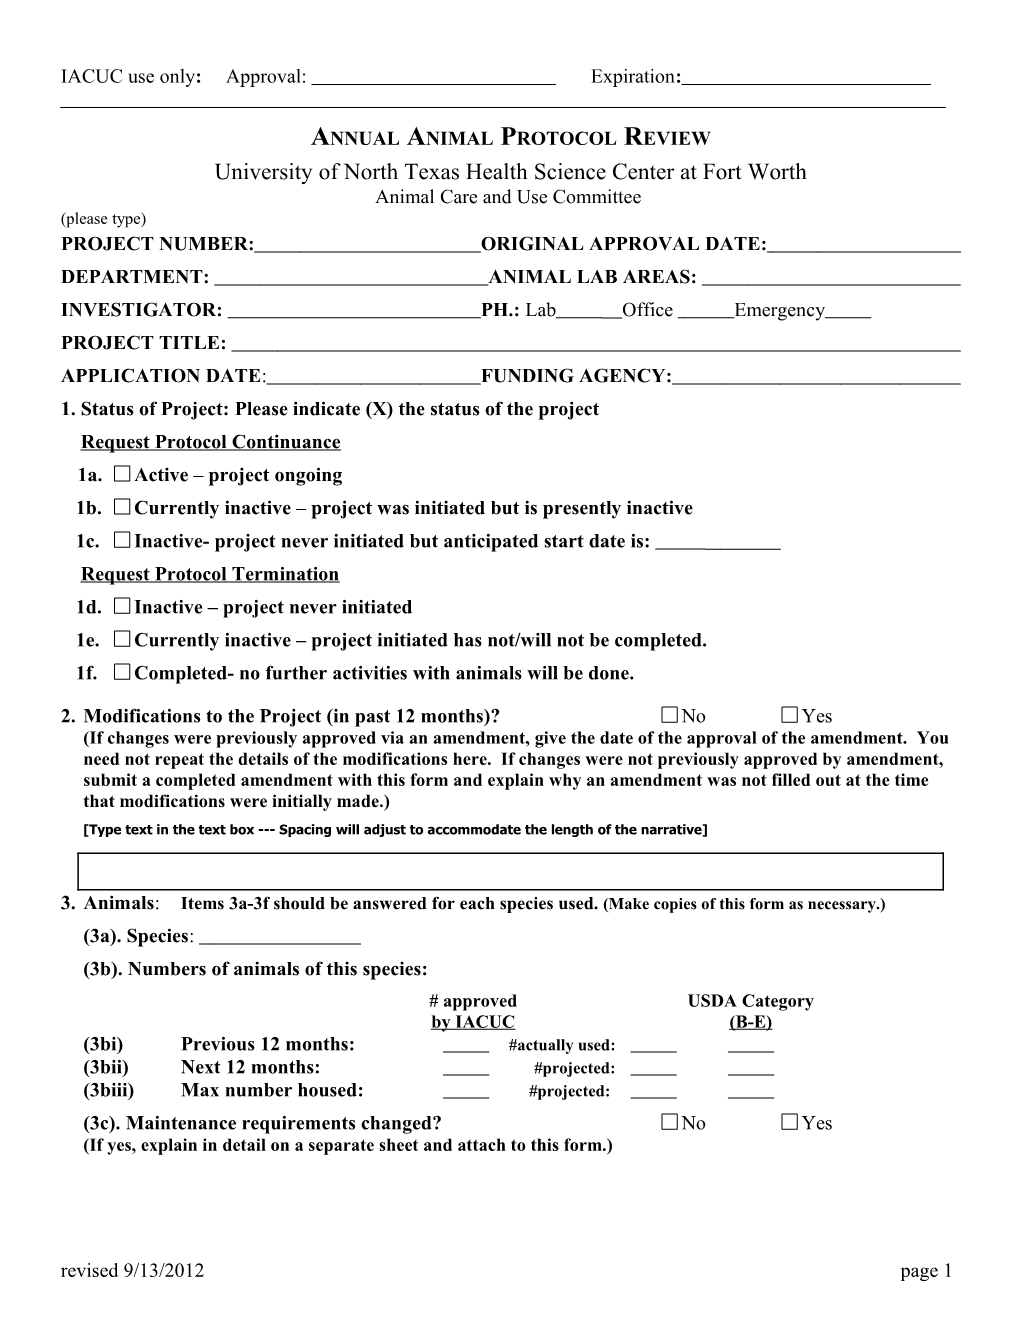 IACUC Annual Review Form (Rev. 3/3/200)